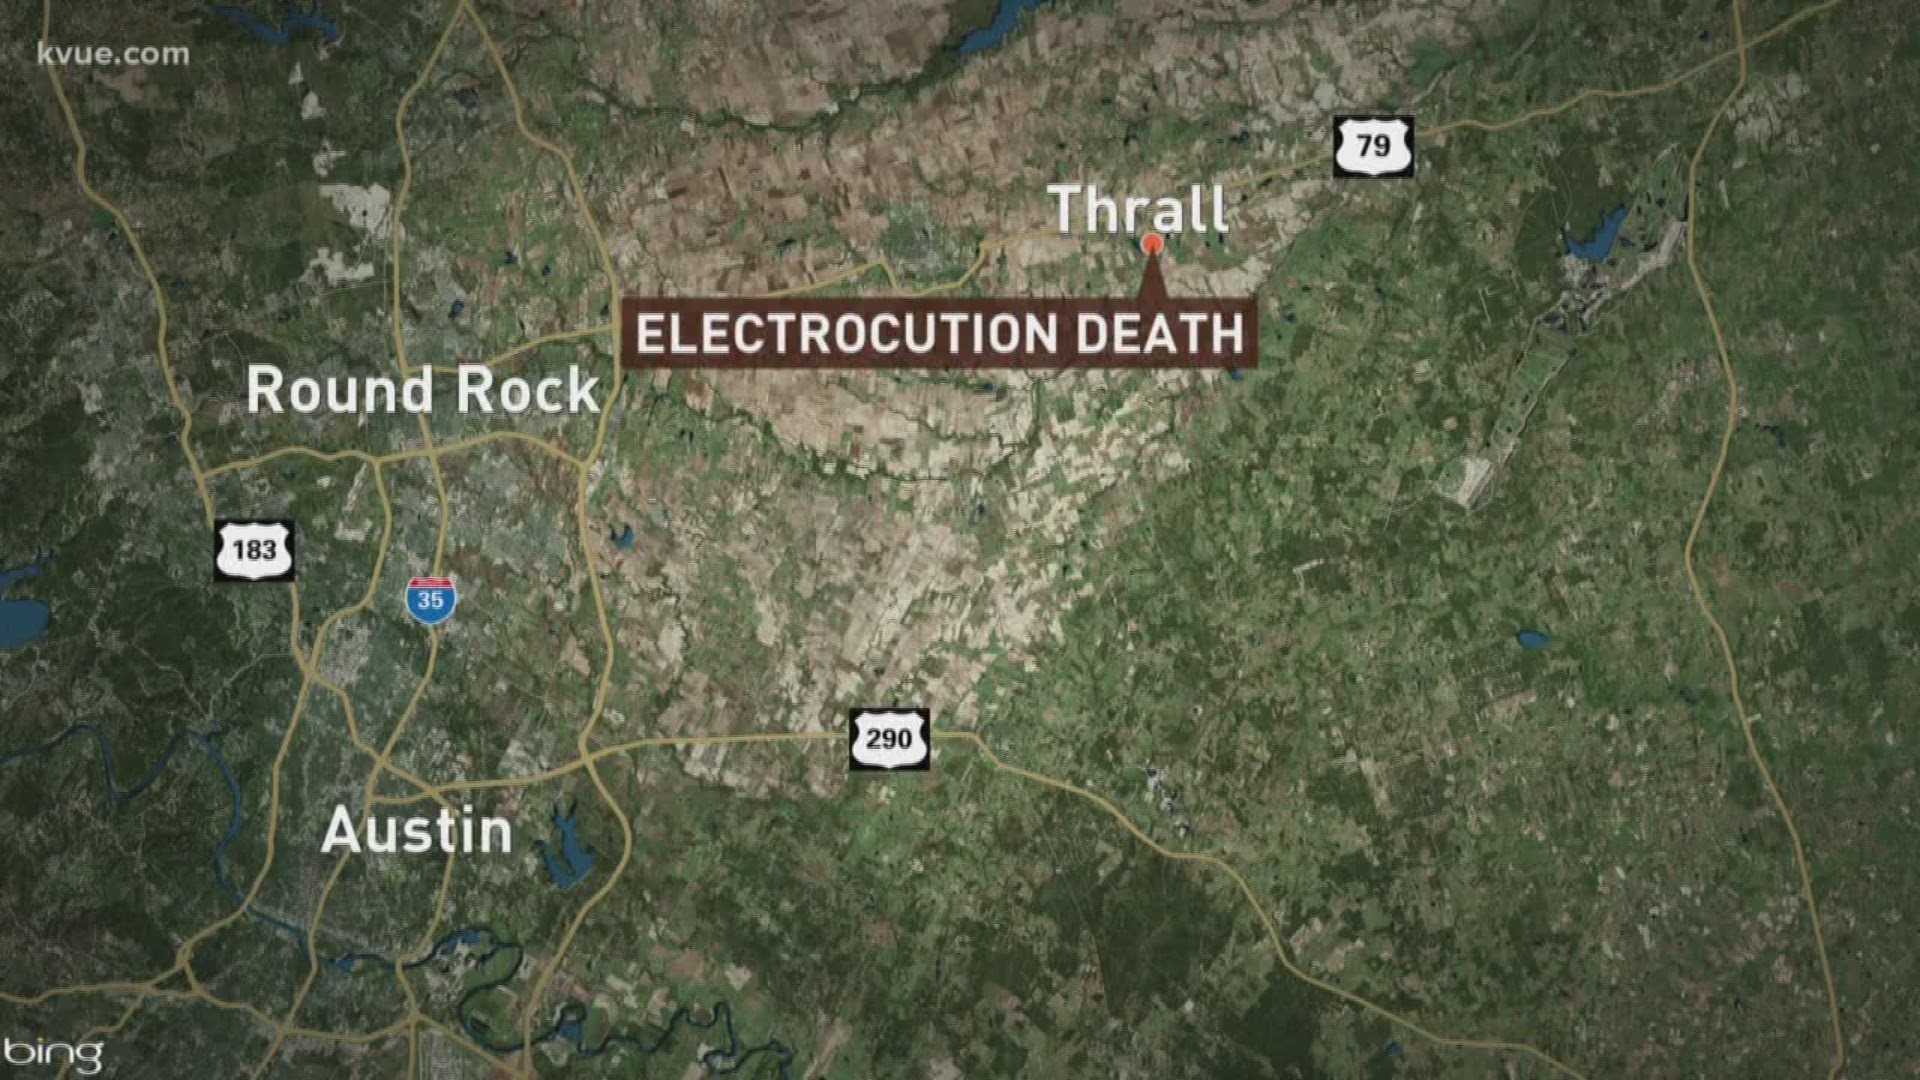 The Williamson County Sheriff's Office said the 20-year-old man was electrocuted while he was at work.